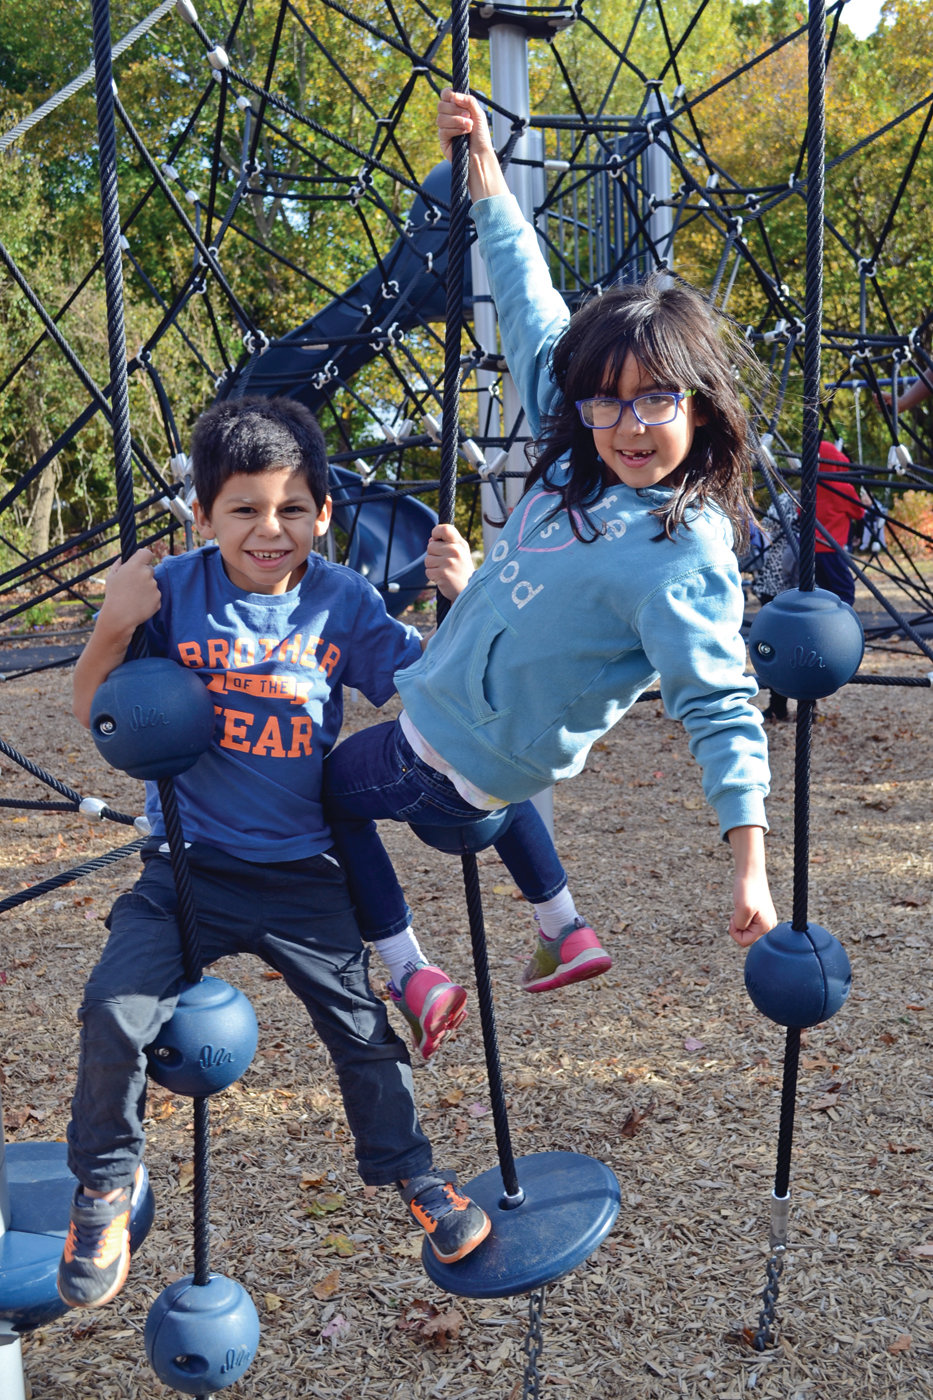 WHAT IT'S ALL ABOUT: Nicholas and Lillian St. Germain tested out part of the new playground shortly after the ribbon was cut, and the smiles seemed to indicate a positive review.